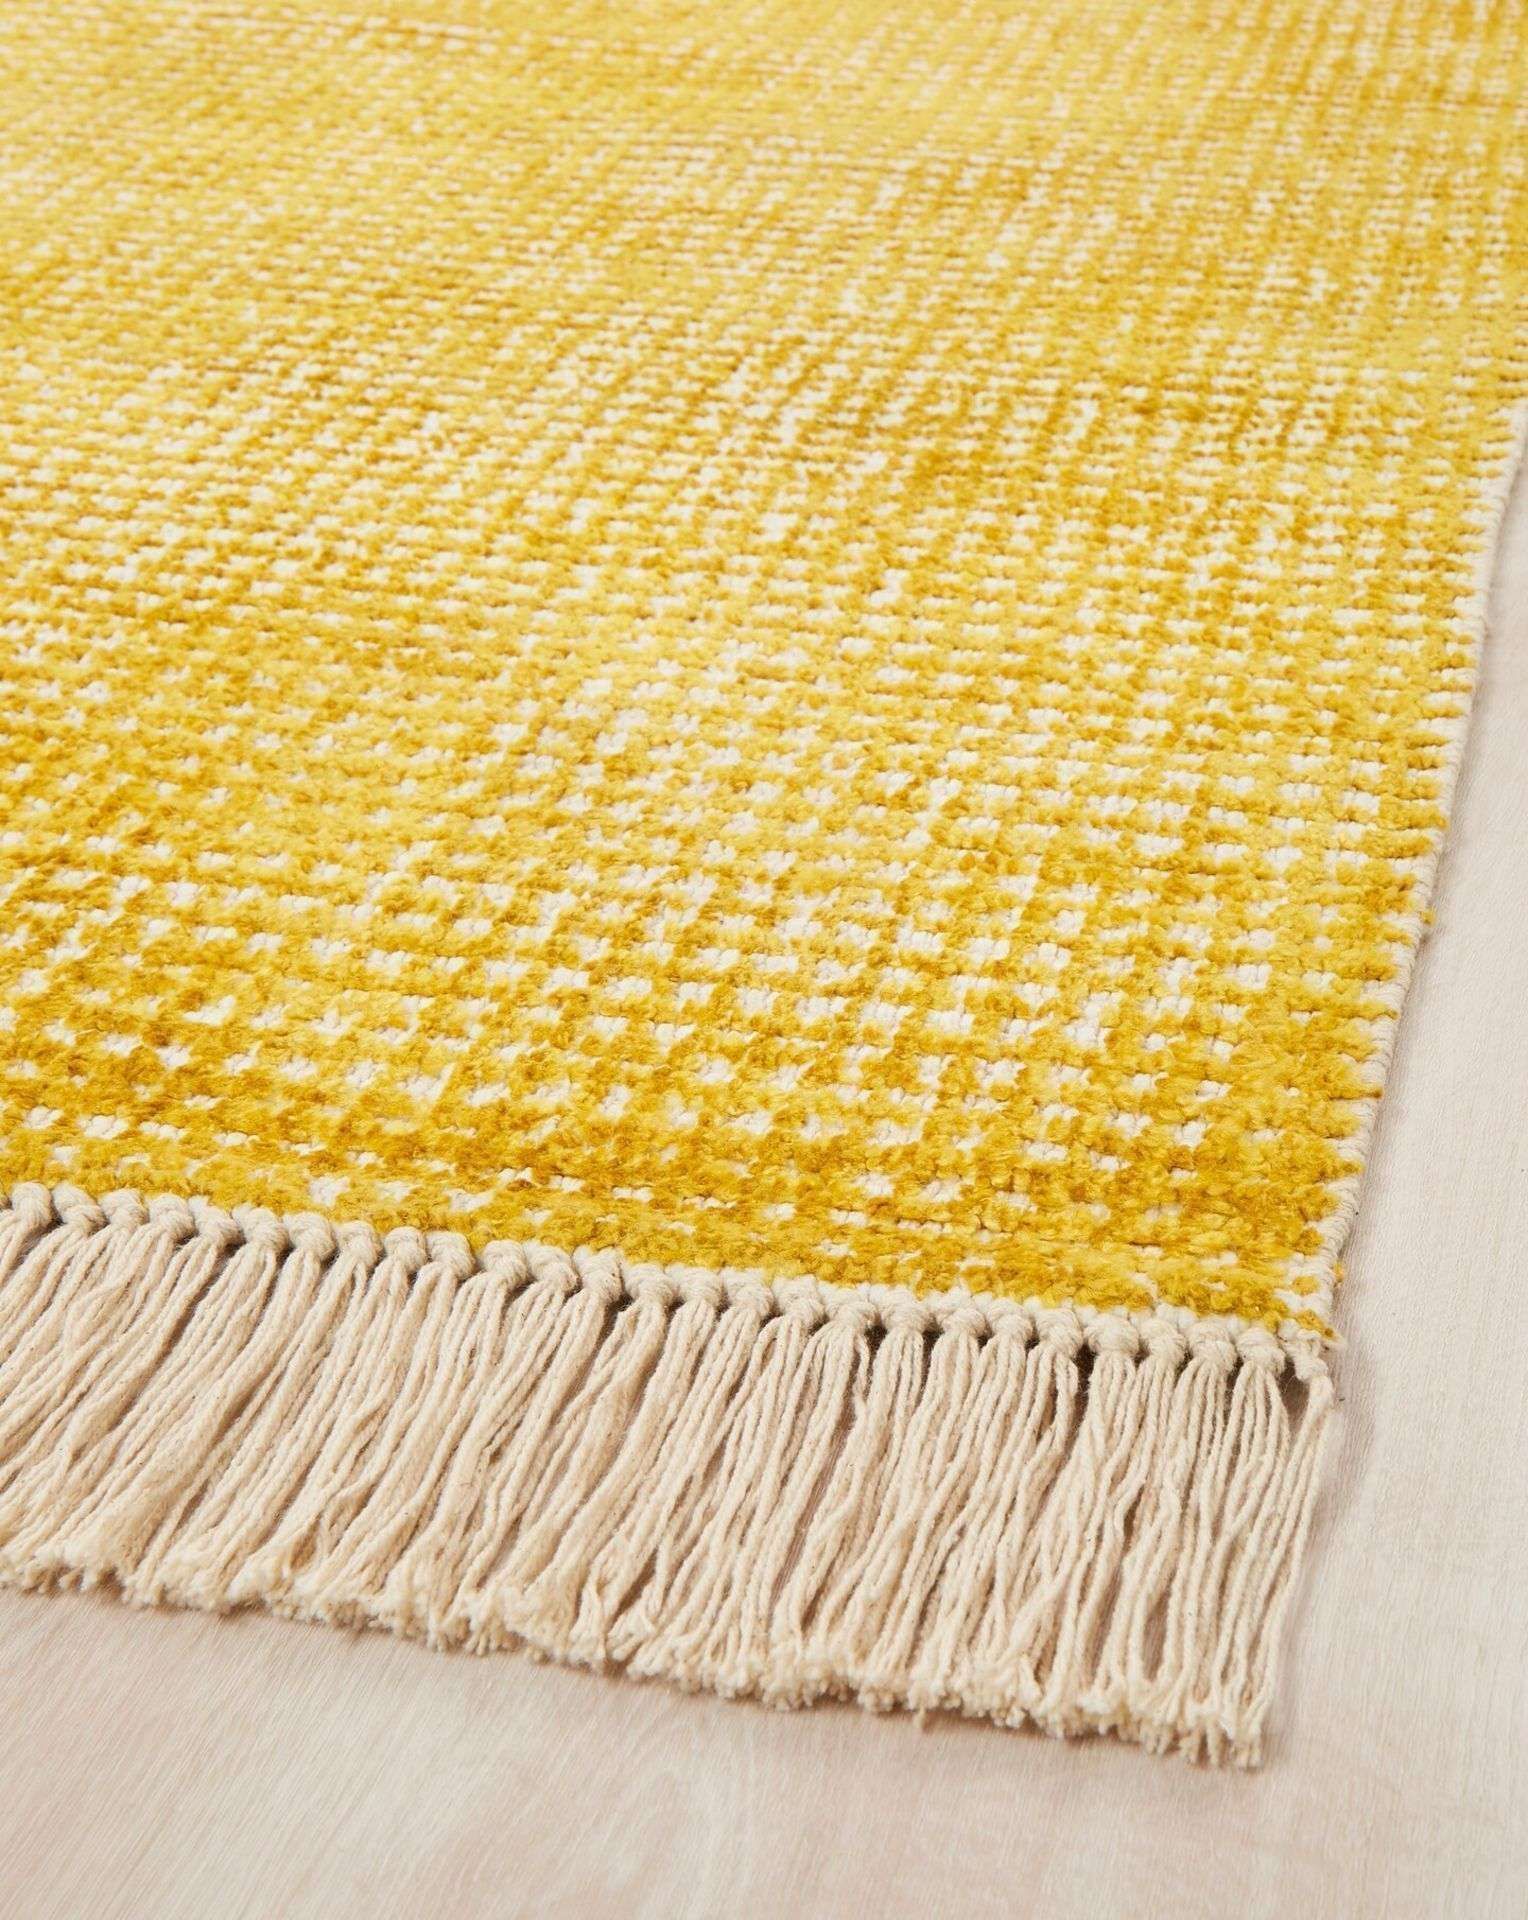 3 X BRAND NEW NUGGET GOLD HALLIE FRINGE LUXURY RUGS 120 X 170CM (UD804) R13A-7 - Image 2 of 2